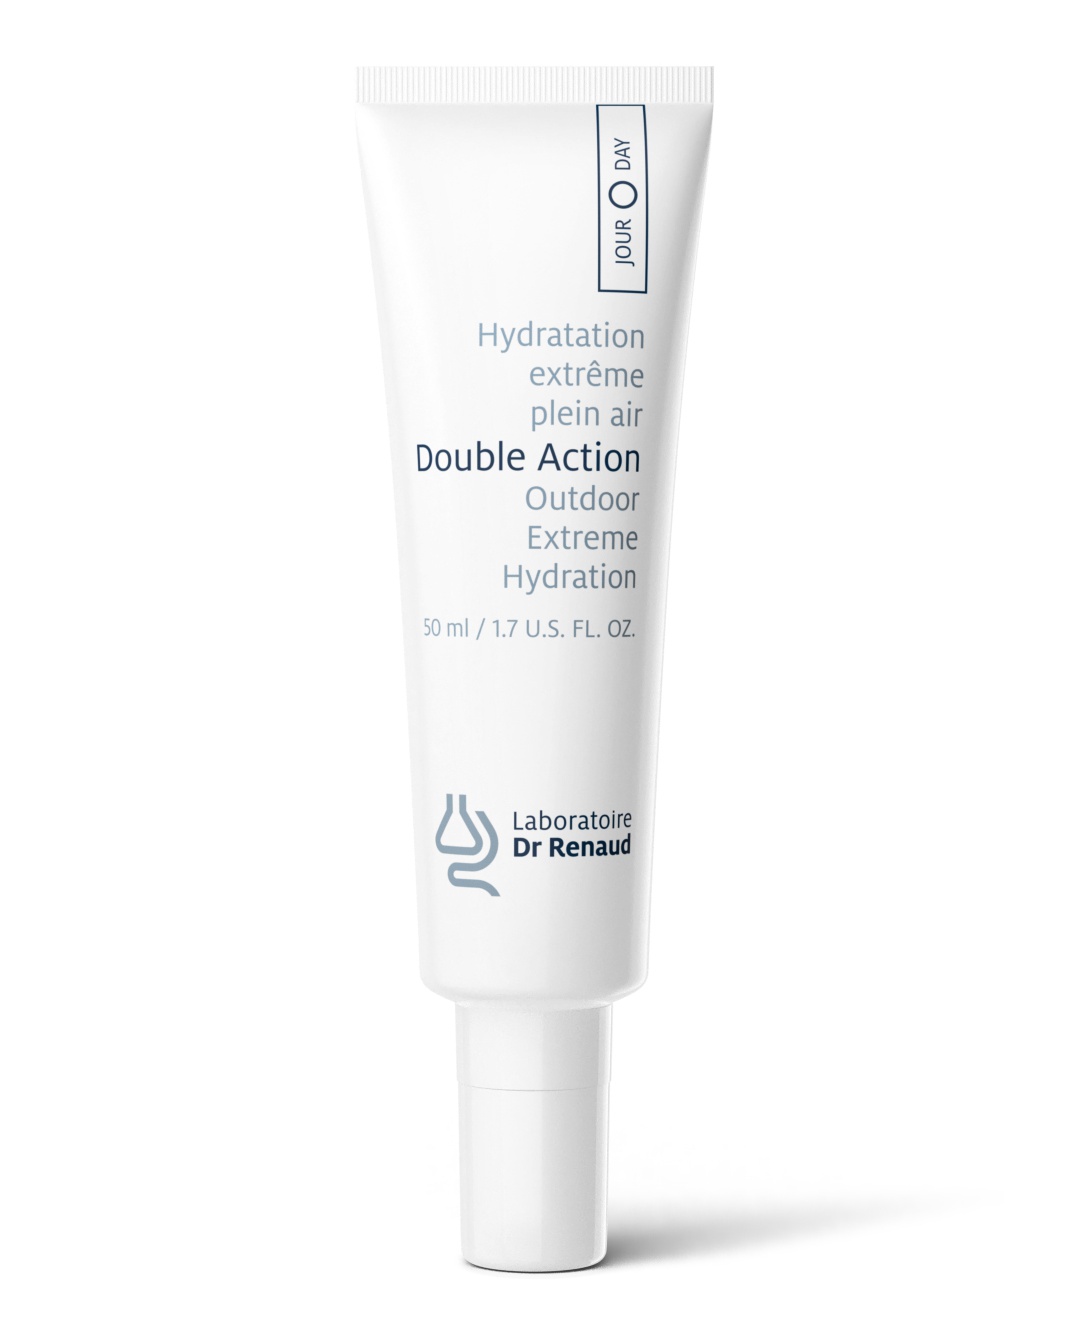 laboratoire dr renaud Double Action Outdoor Extreme Hydration